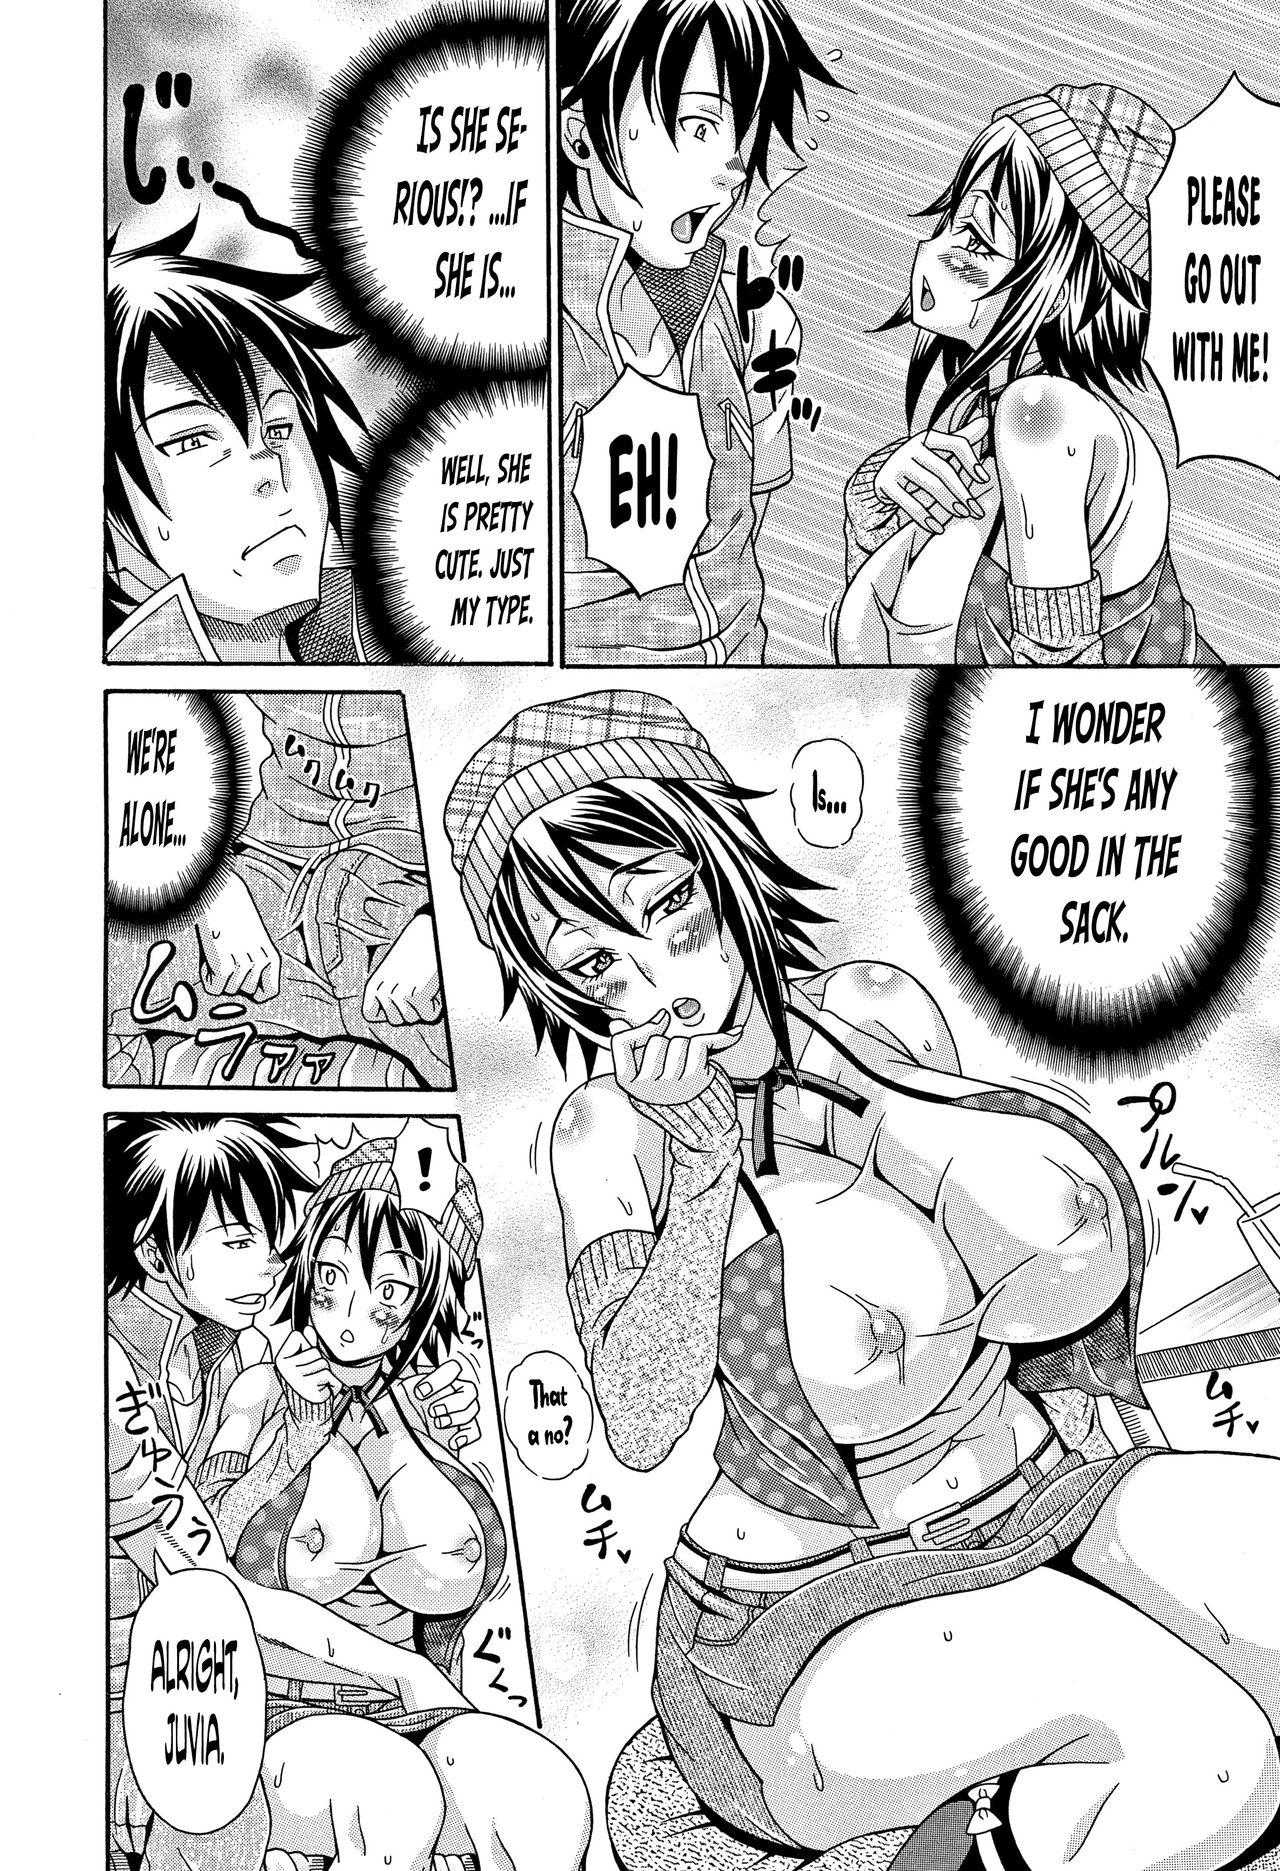 [Andou Hiroyuki] Mamire Chichi - Sticky Tits Feel Hot All Over. Ch.1-6 [English] [doujin-moe.us] 59